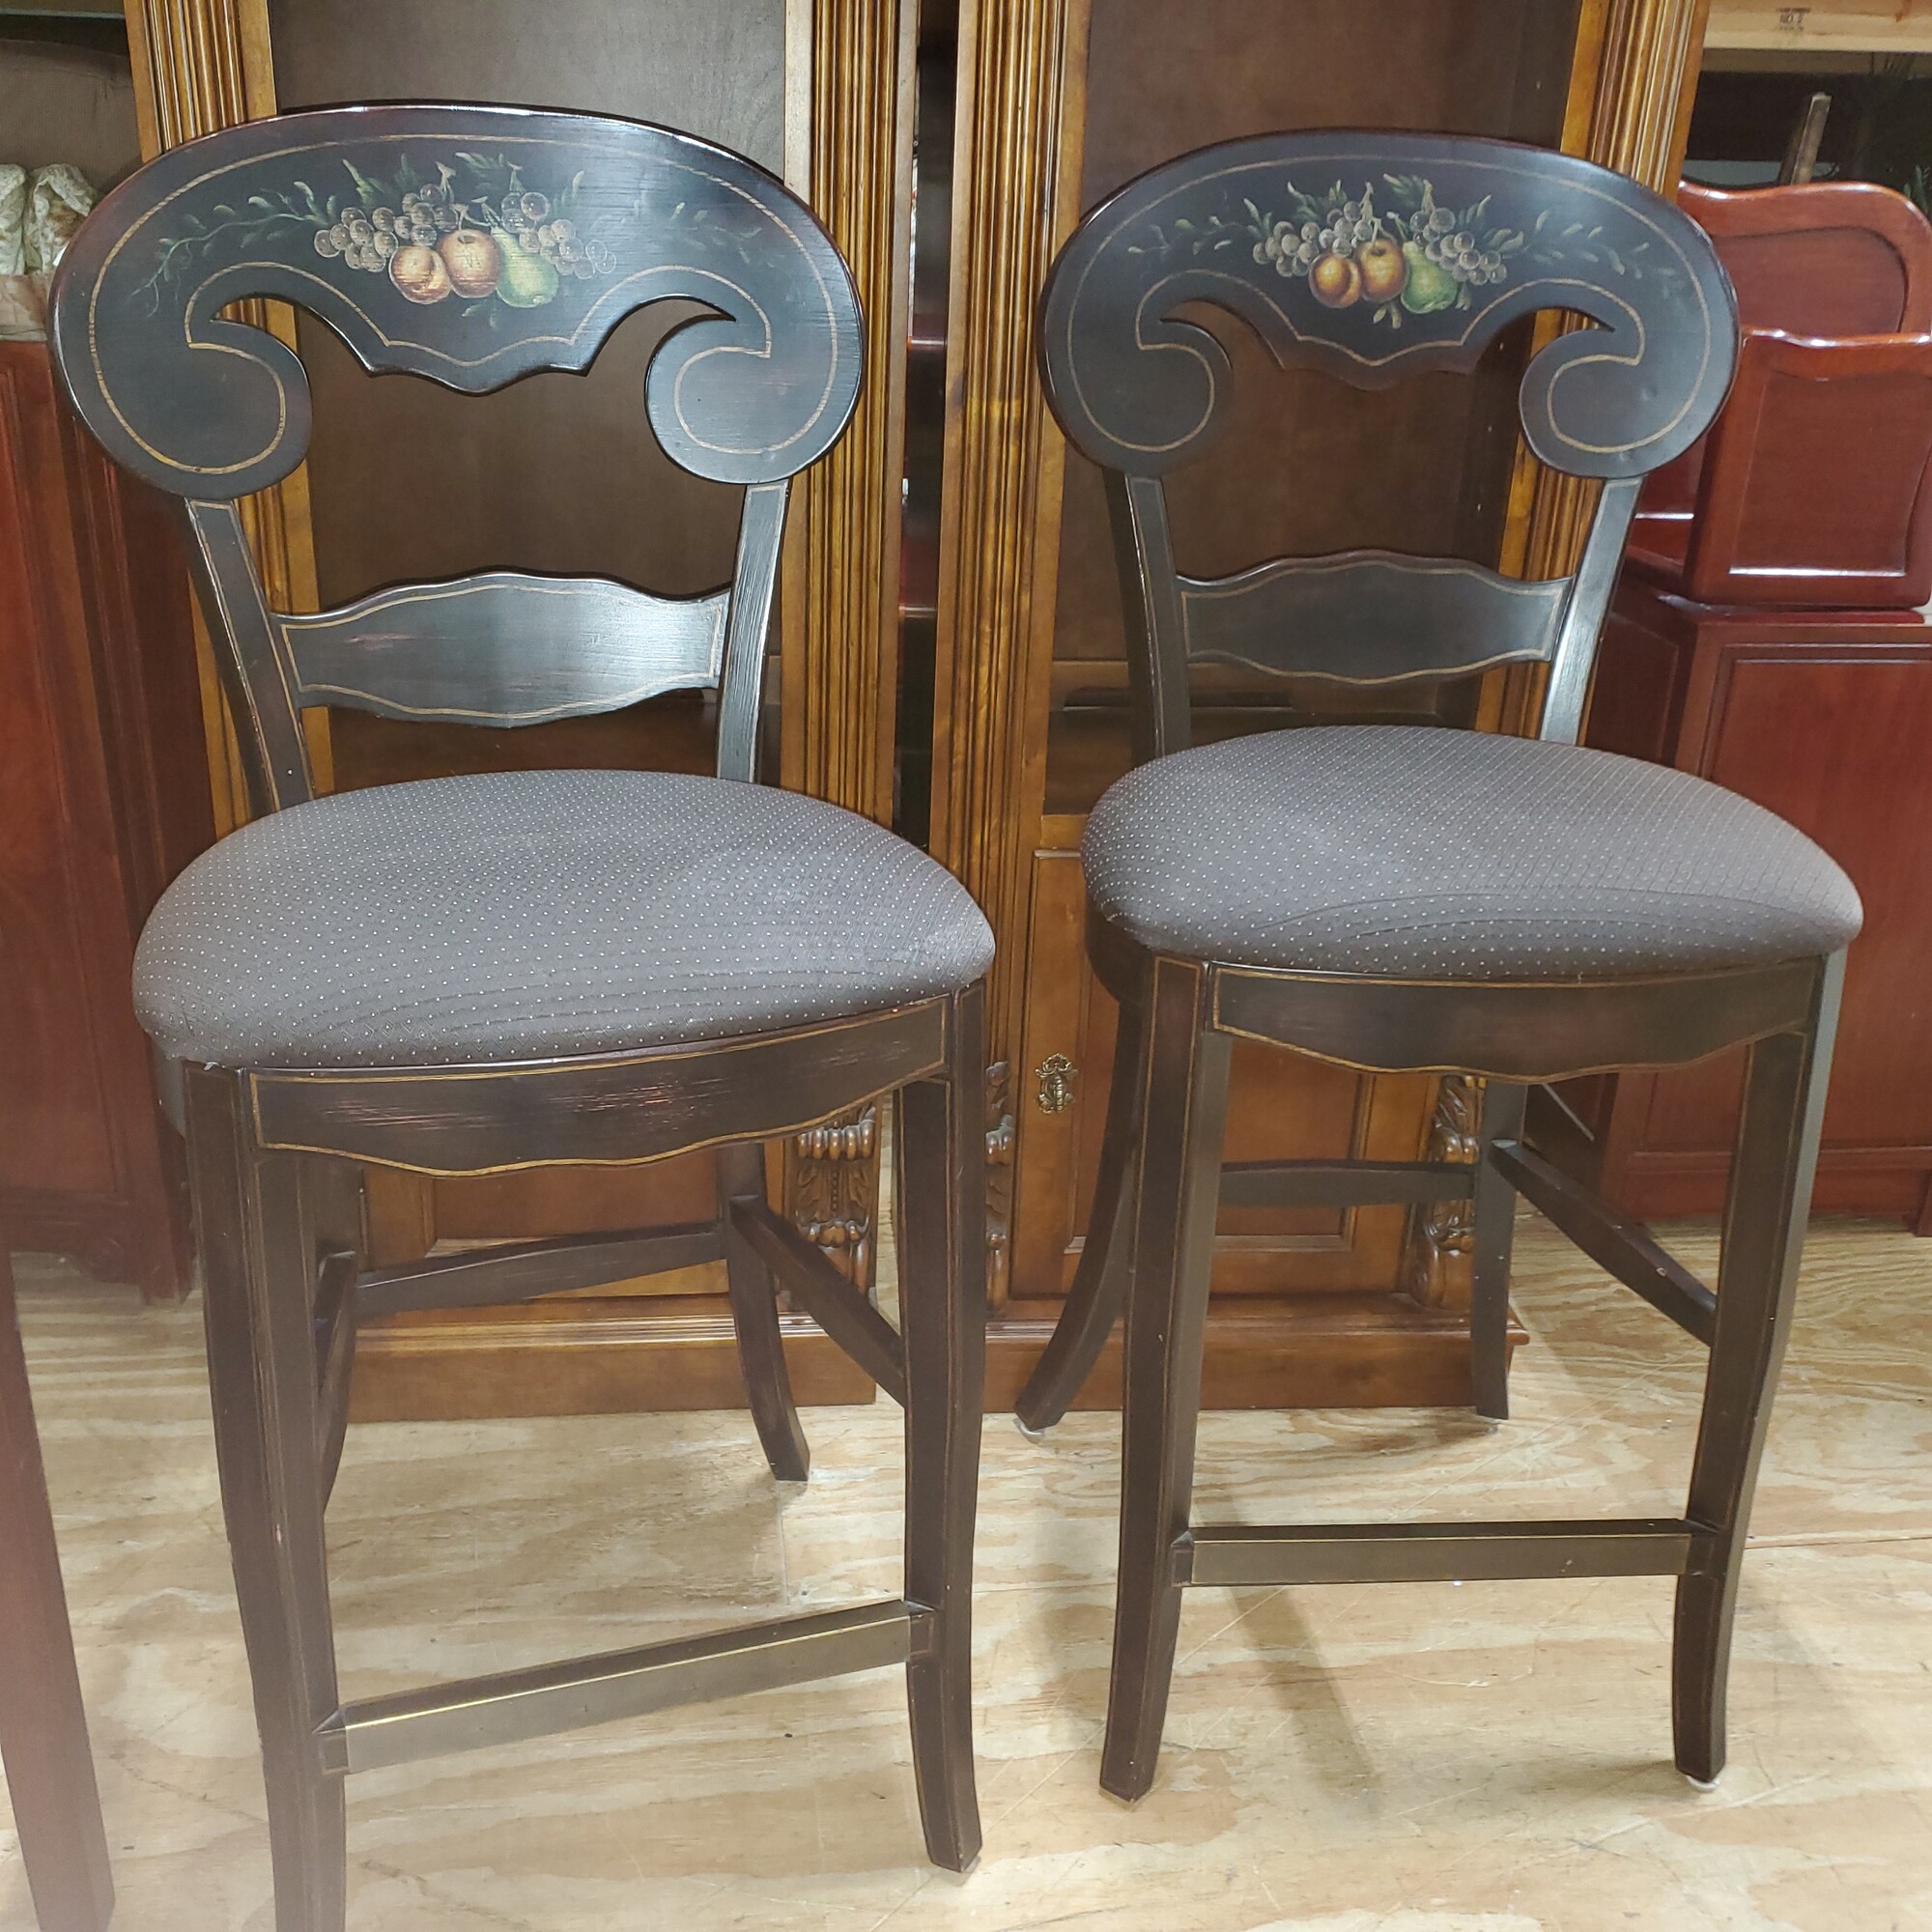 Pair Barstools-Painted Hitchcock Style